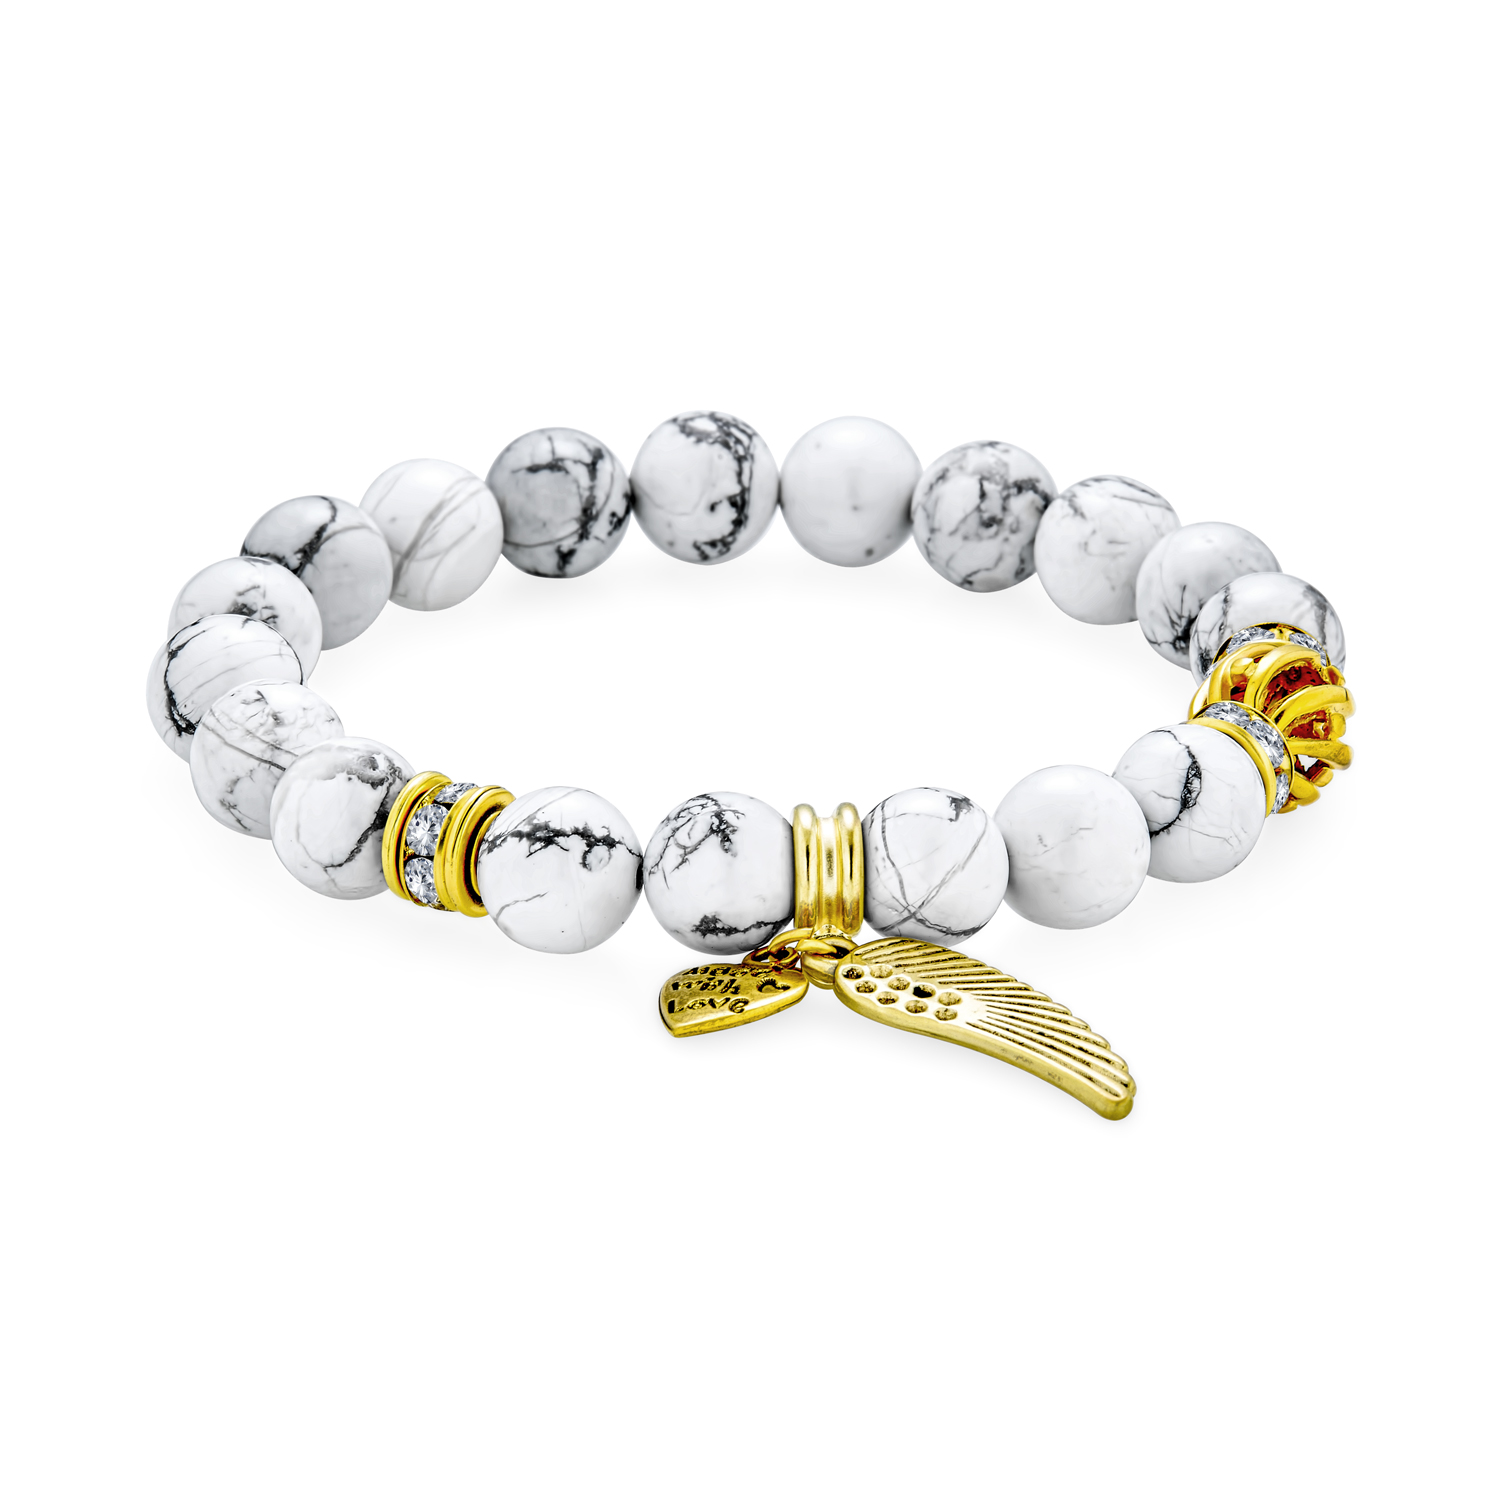 Bling Jewelry White Angel Wing Charm Stretch Bracelet Bead Howlite Charm Gold Plated - image 1 of 6